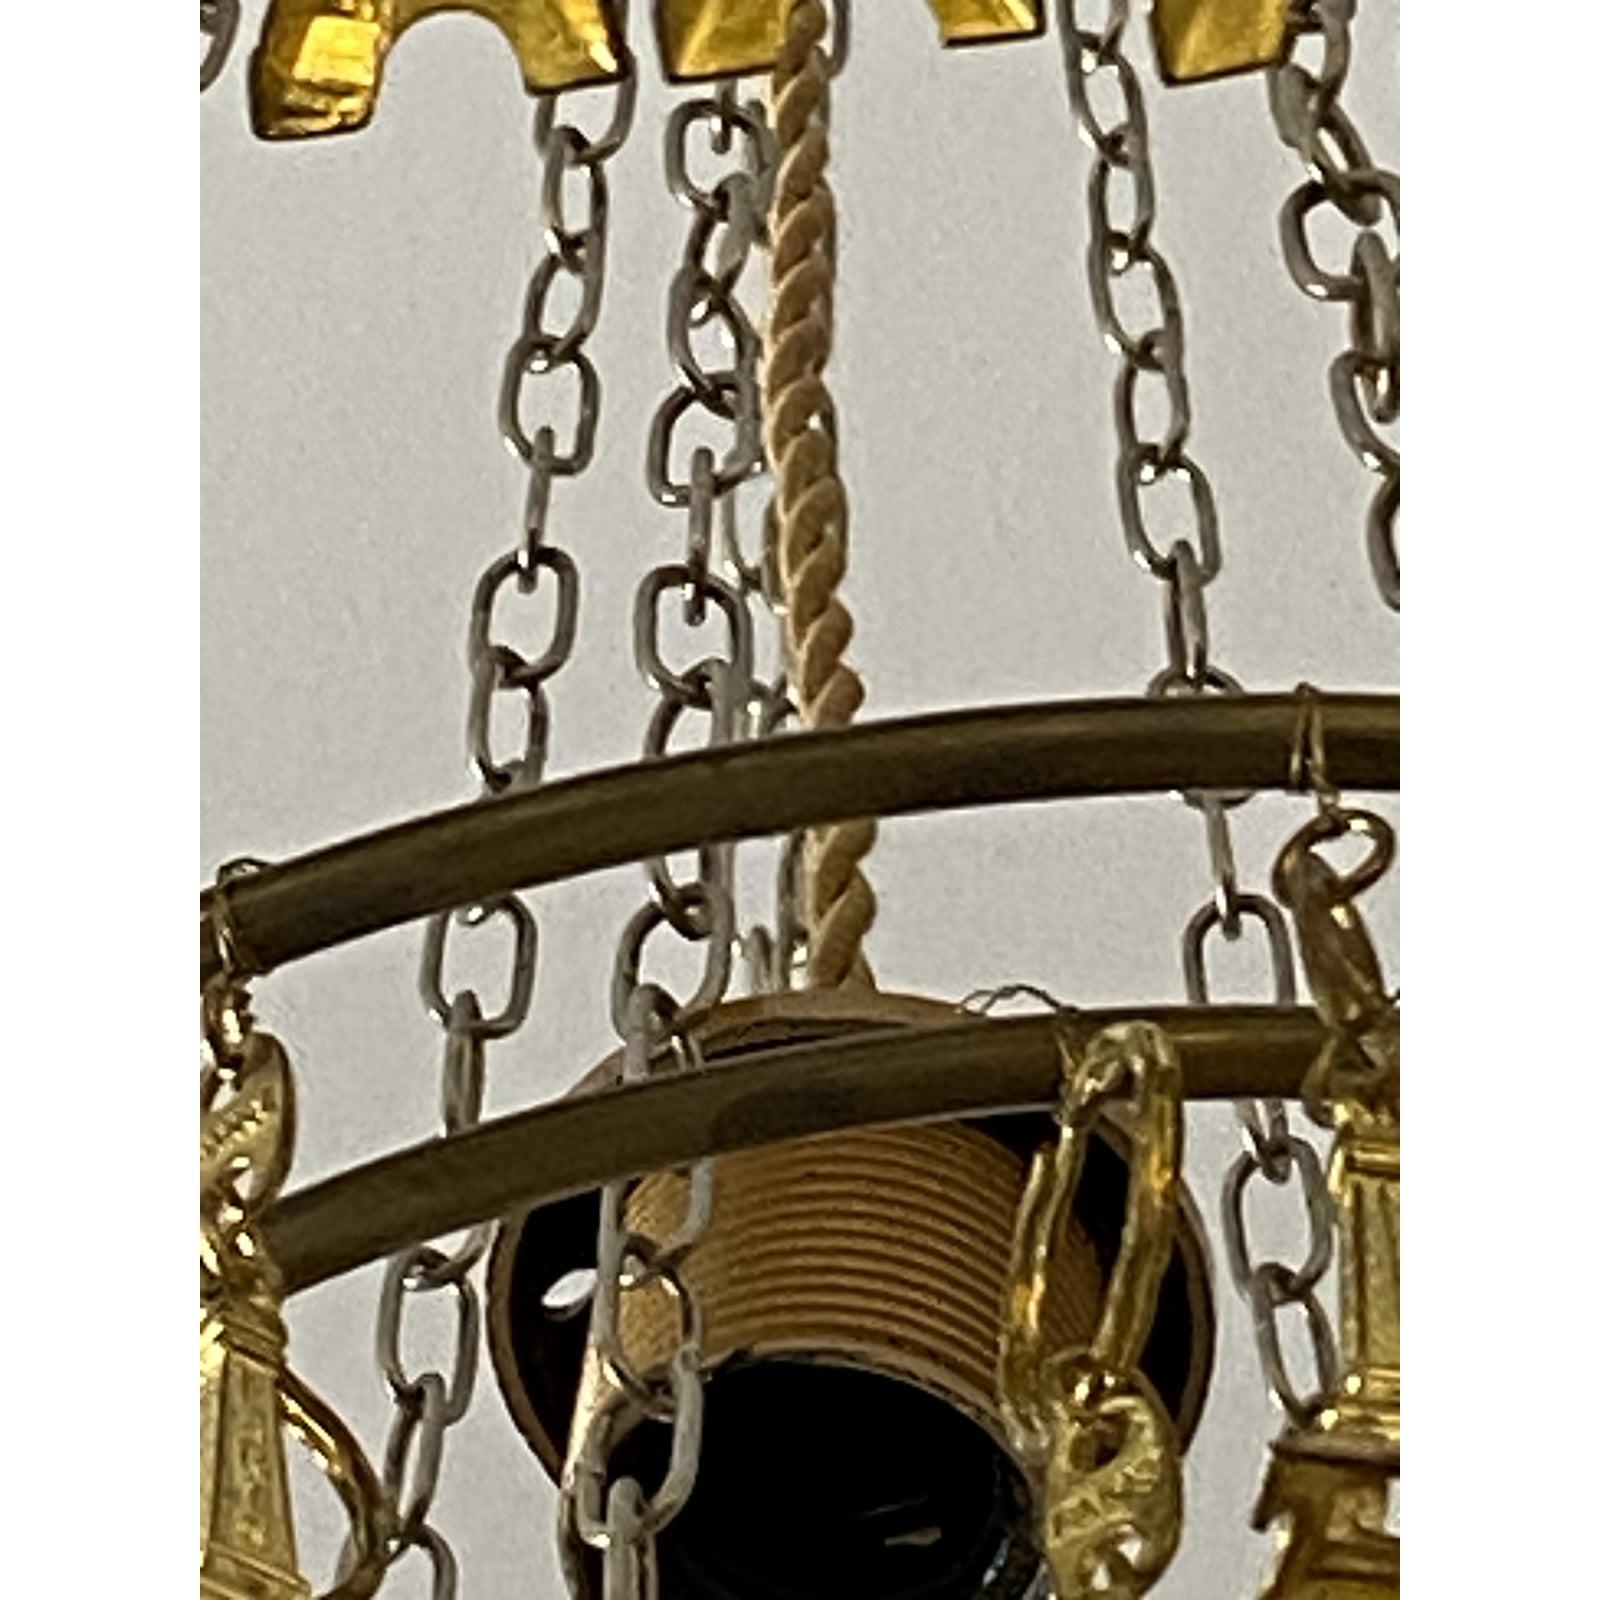 Chandelier with Eiffel Tower Key Chain Fobs In Good Condition For Sale In West Palm Beach, FL